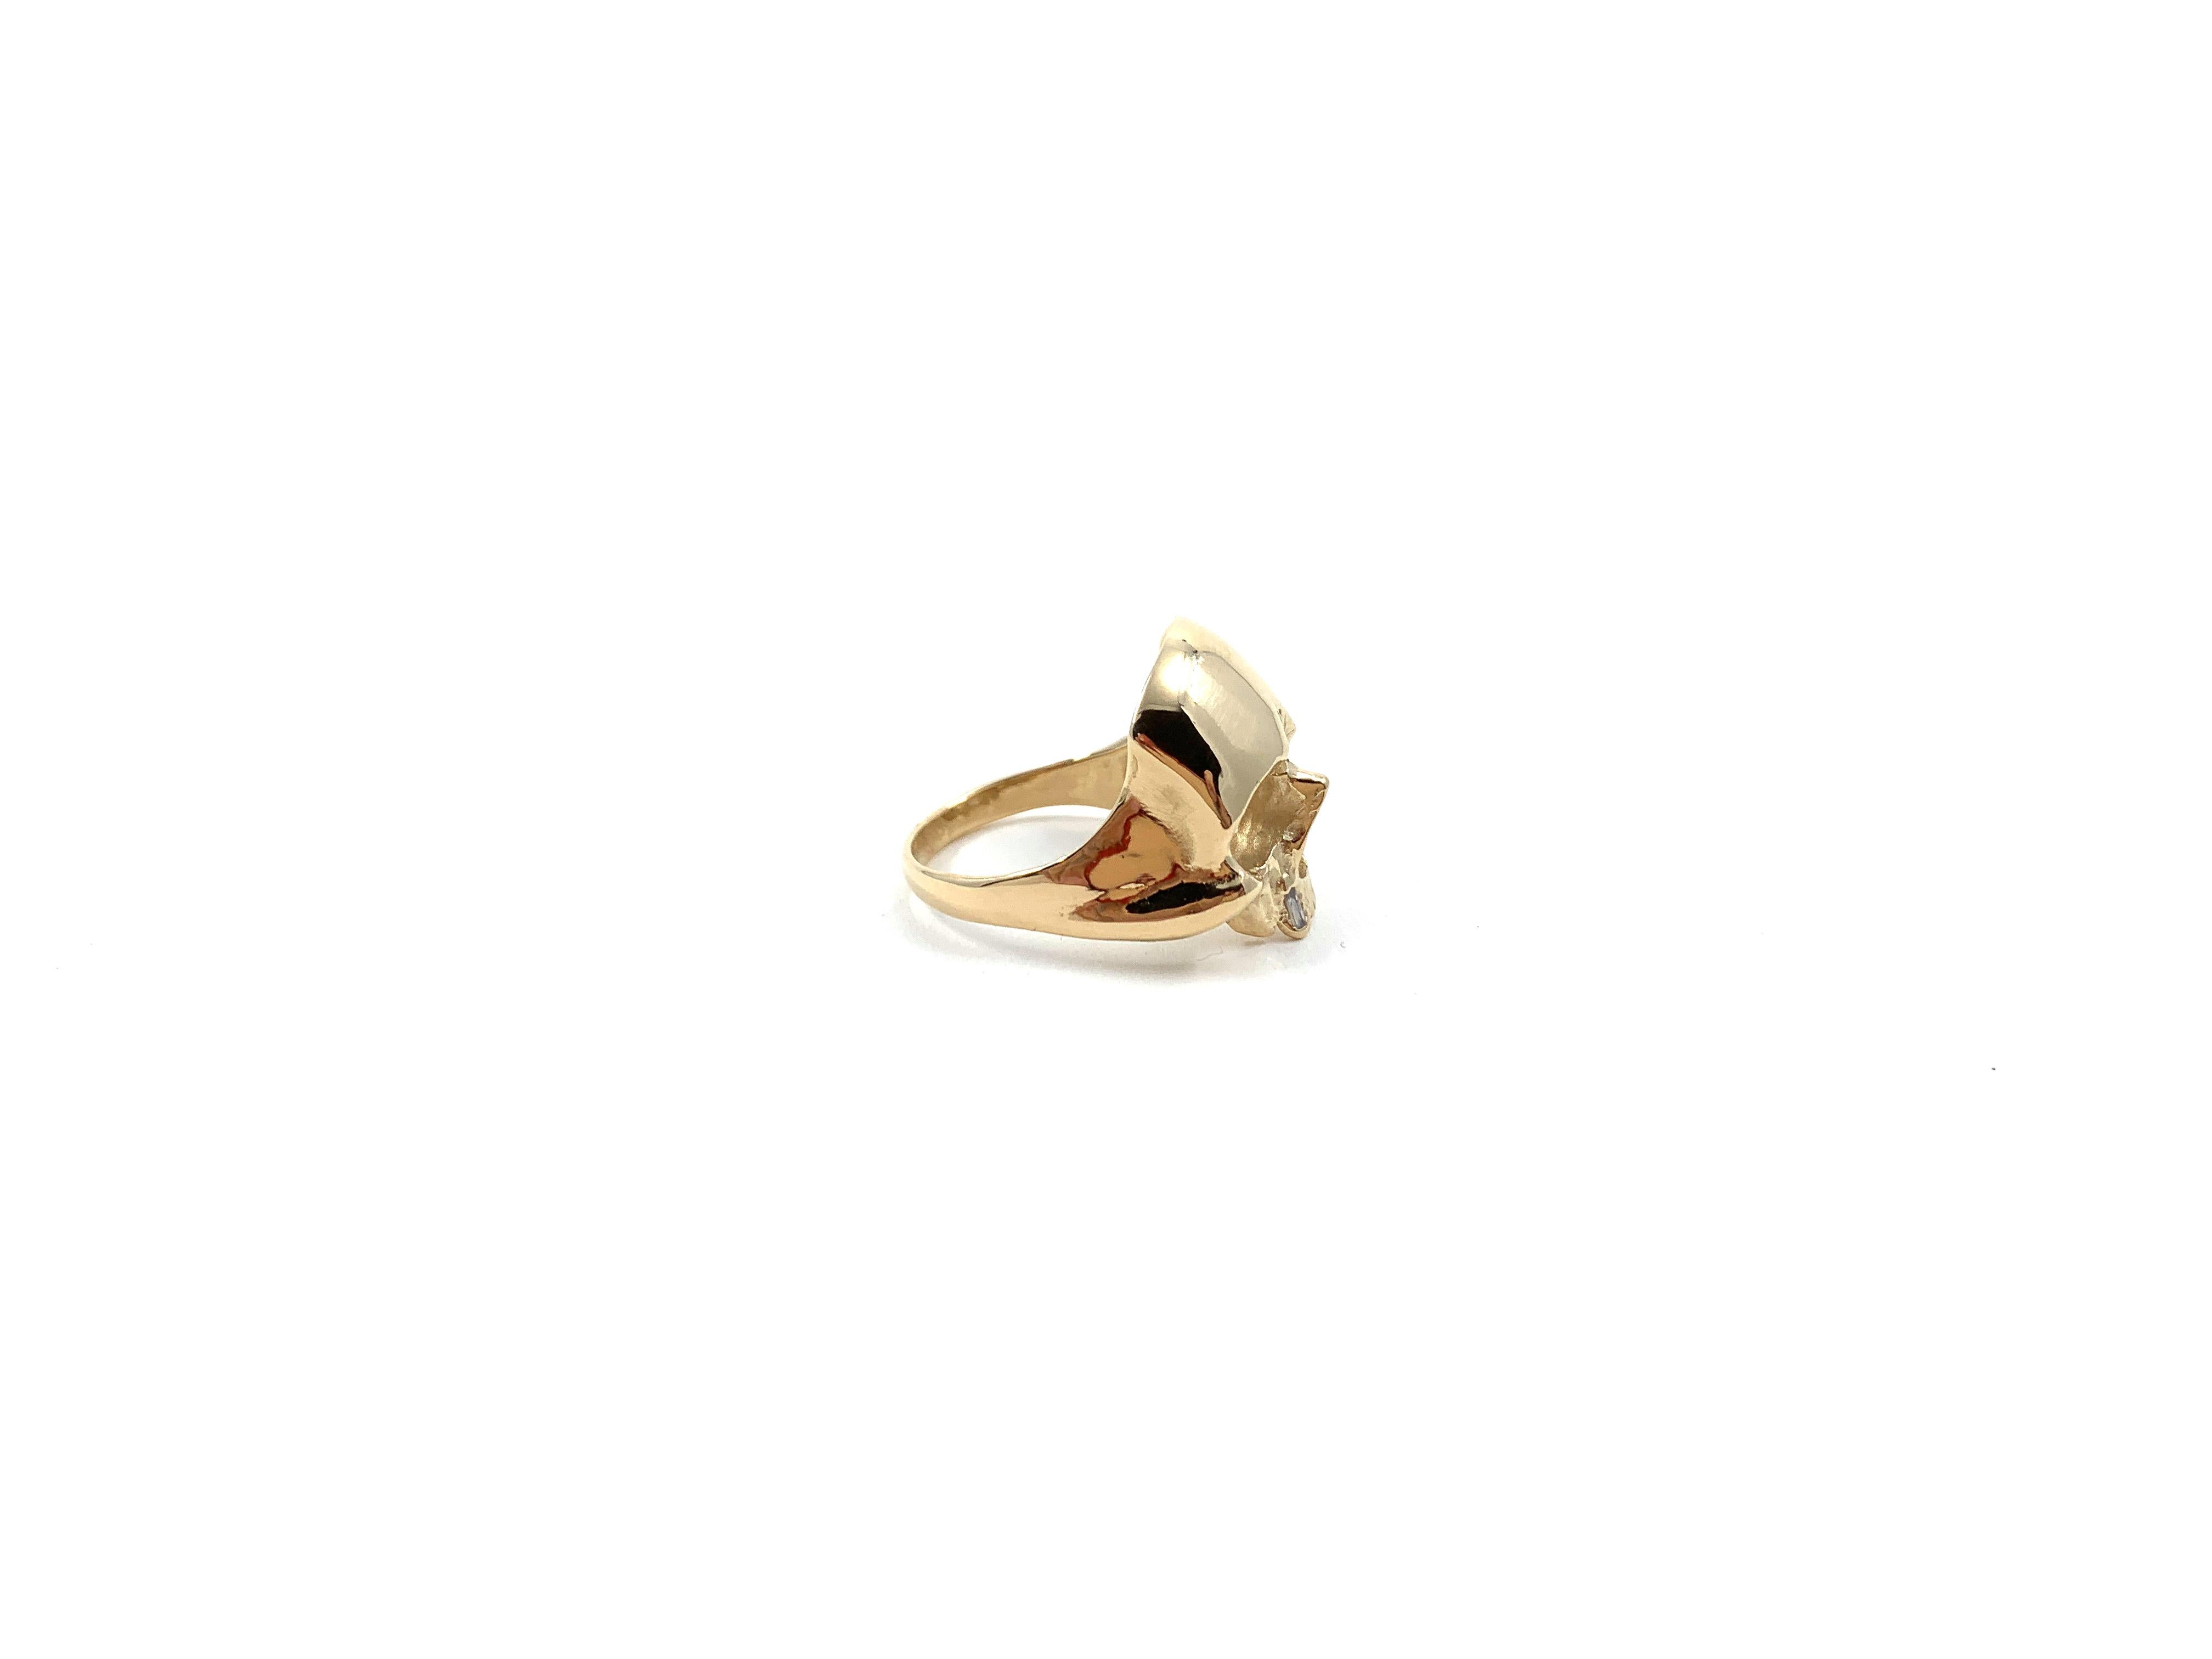 For Sale:  Memento Mori Skull Ring in 14k Gold with Diamond Tooth by Alex Jacques Designs 5